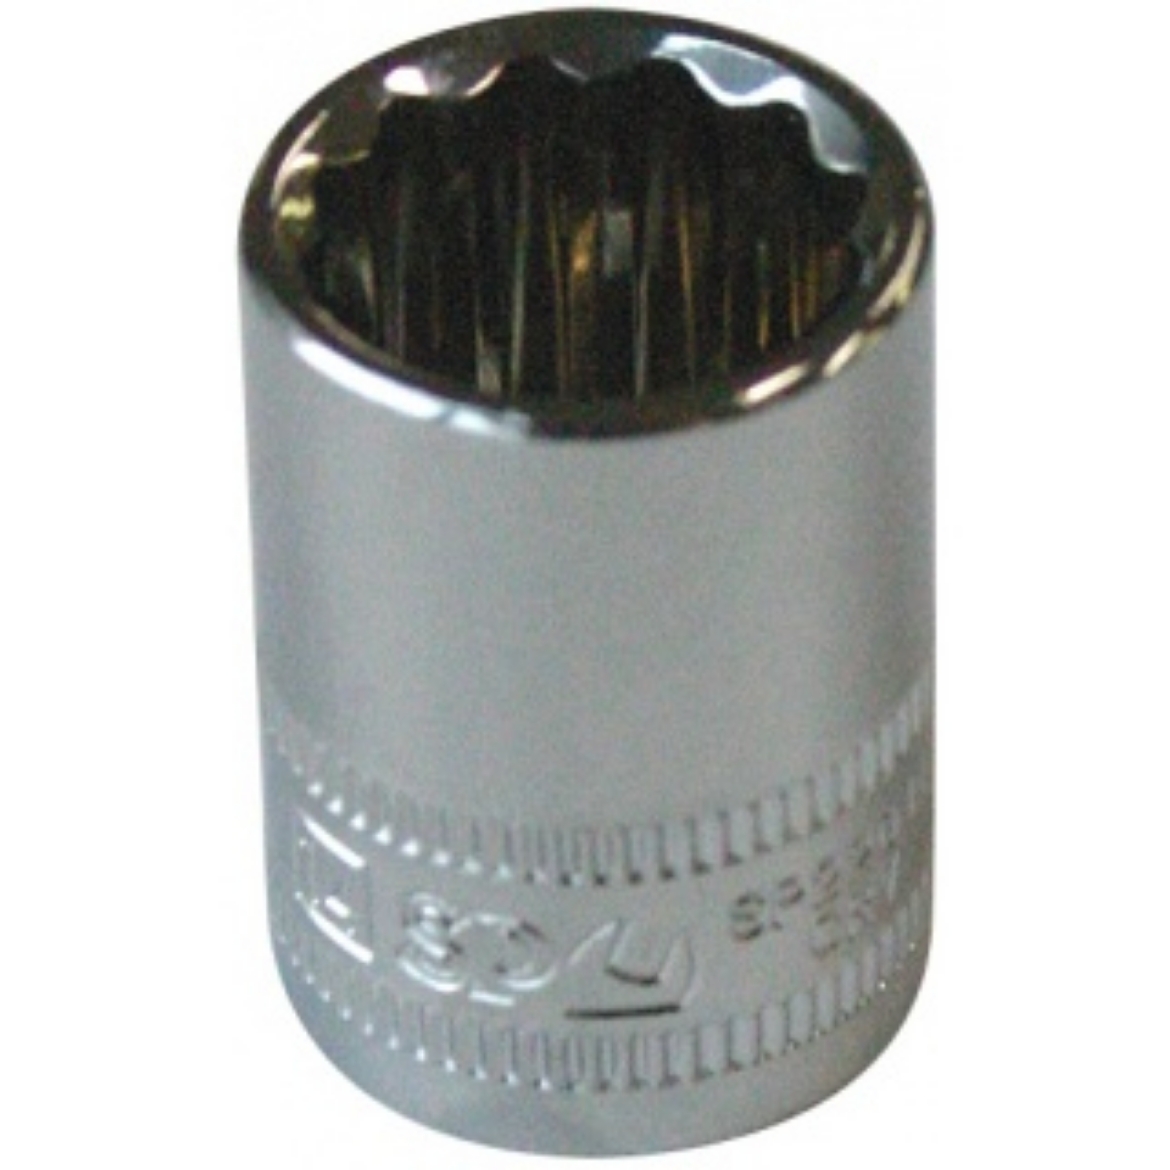 Picture of SOCKET 3/8"DR 12PT METRIC 14MM SP TOOLS